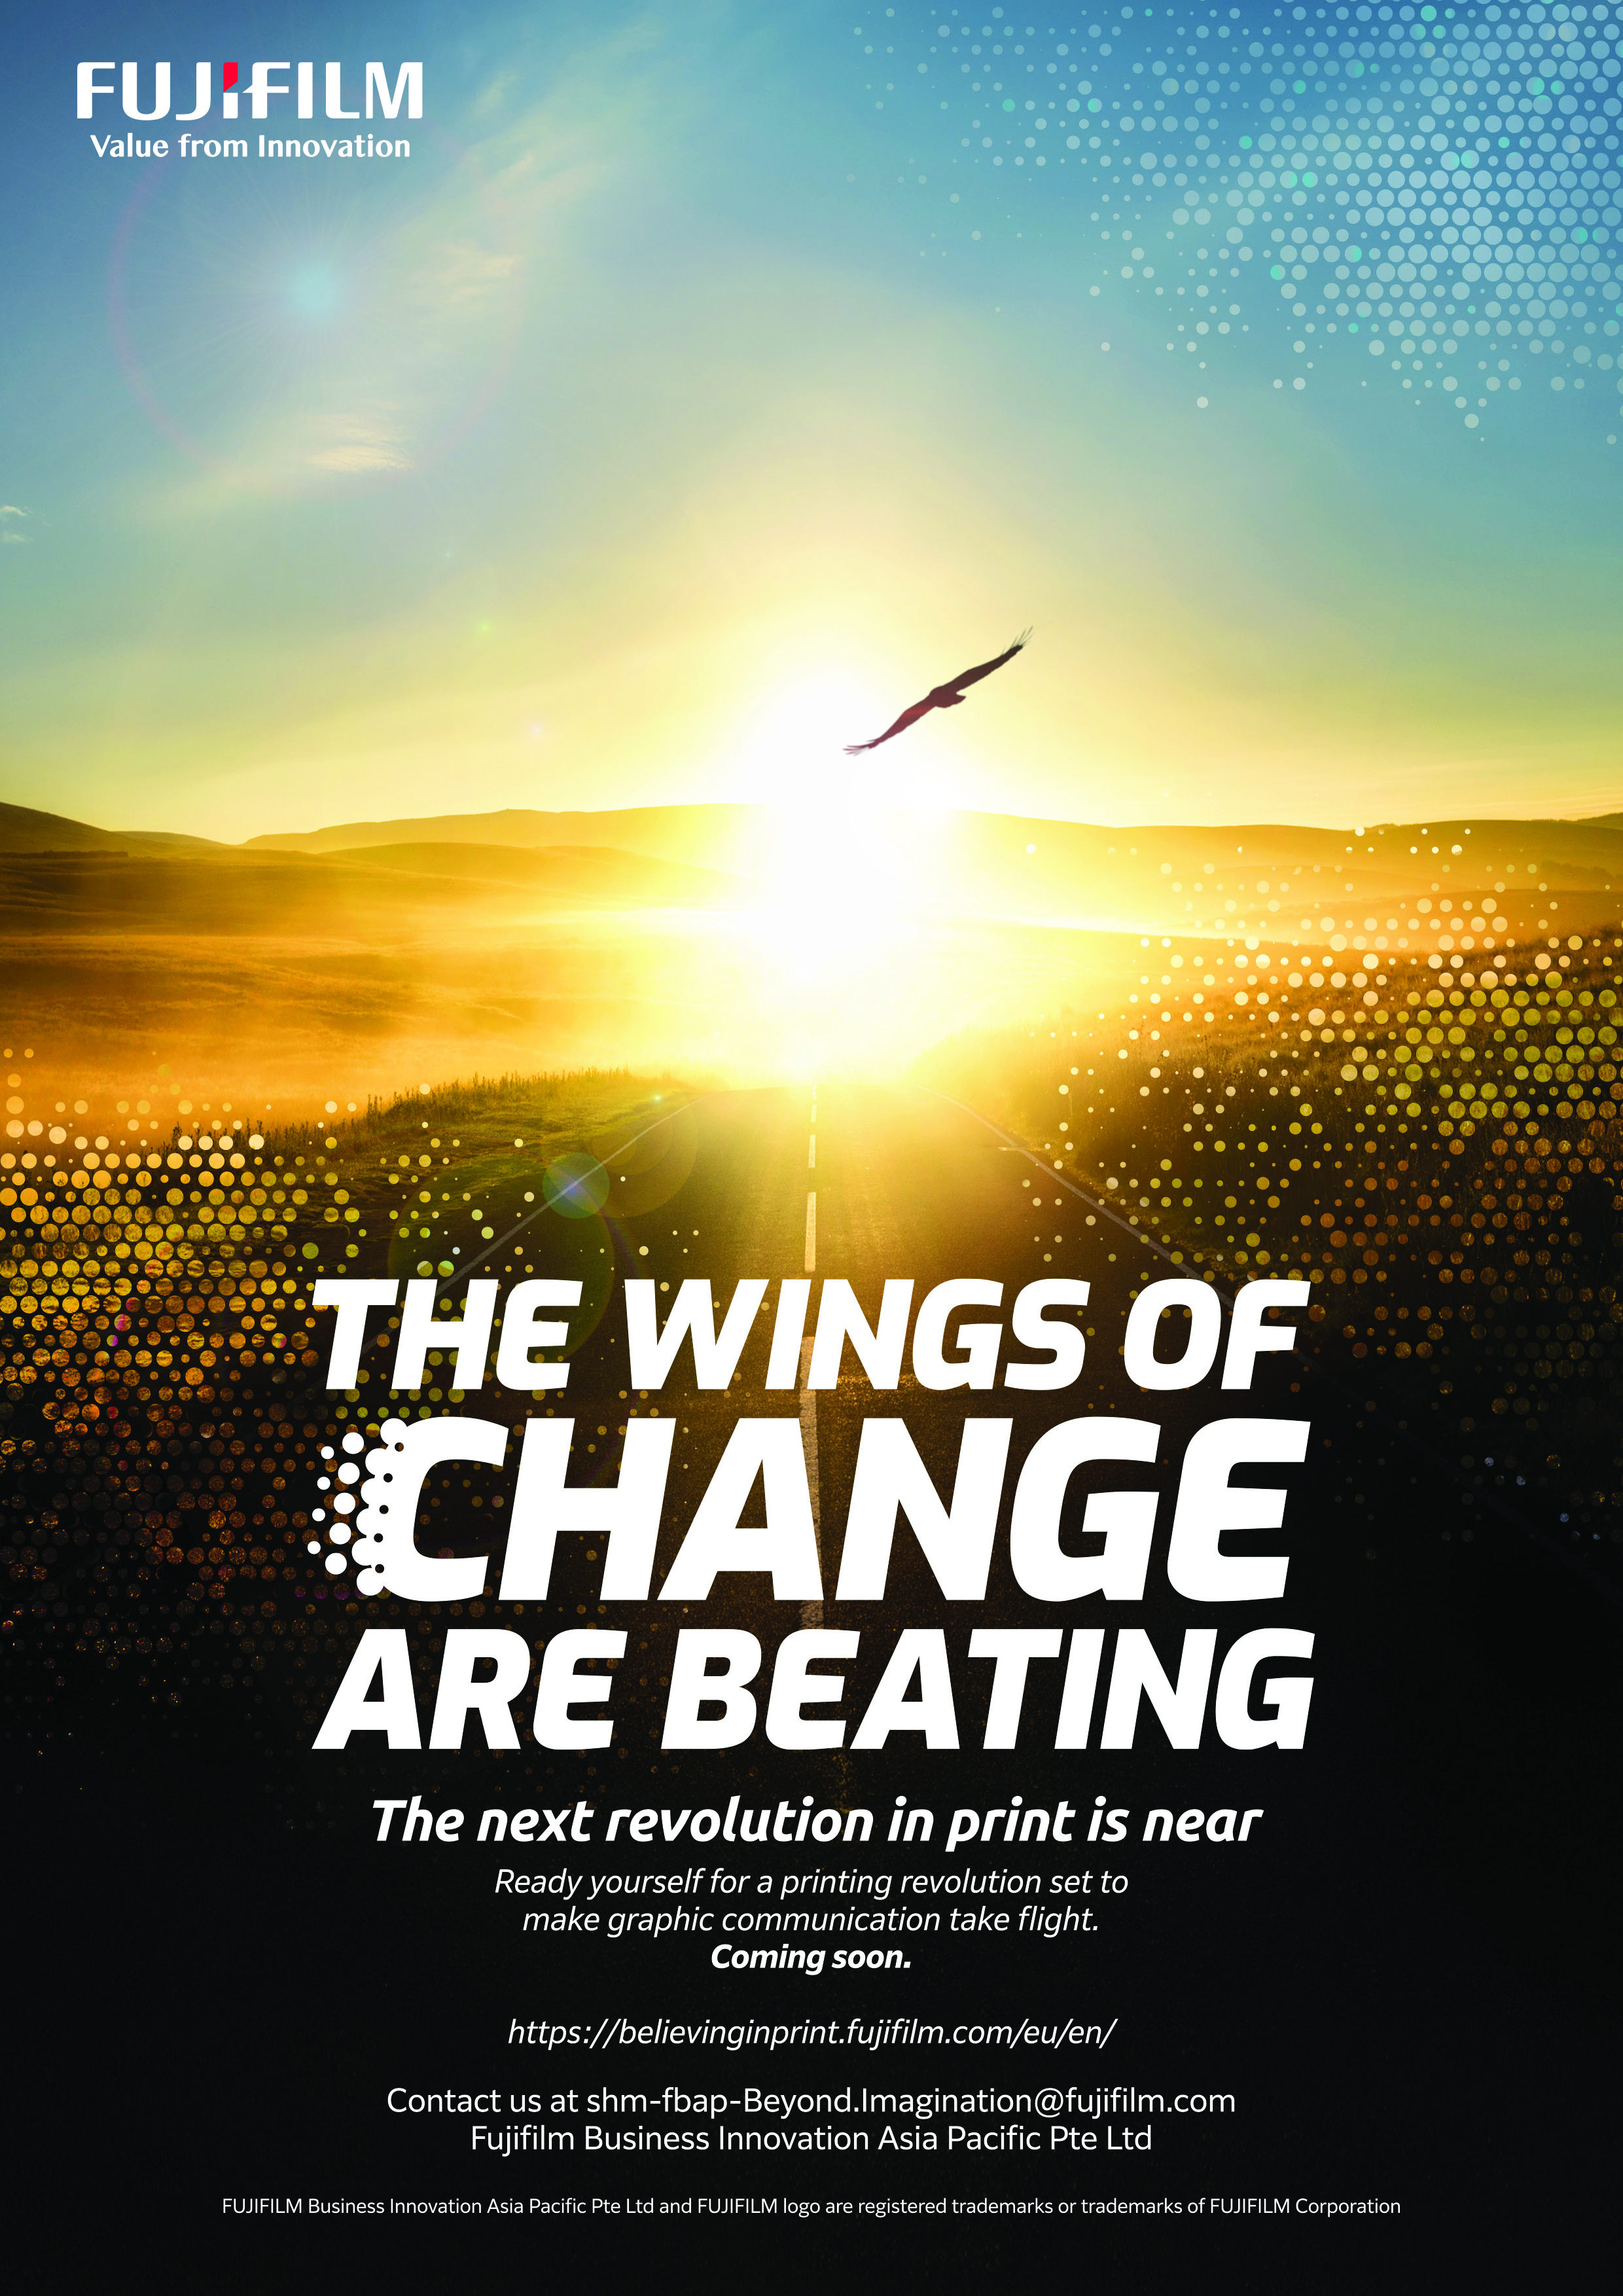 The Wings of Change are Beating - The next revolution in print is near